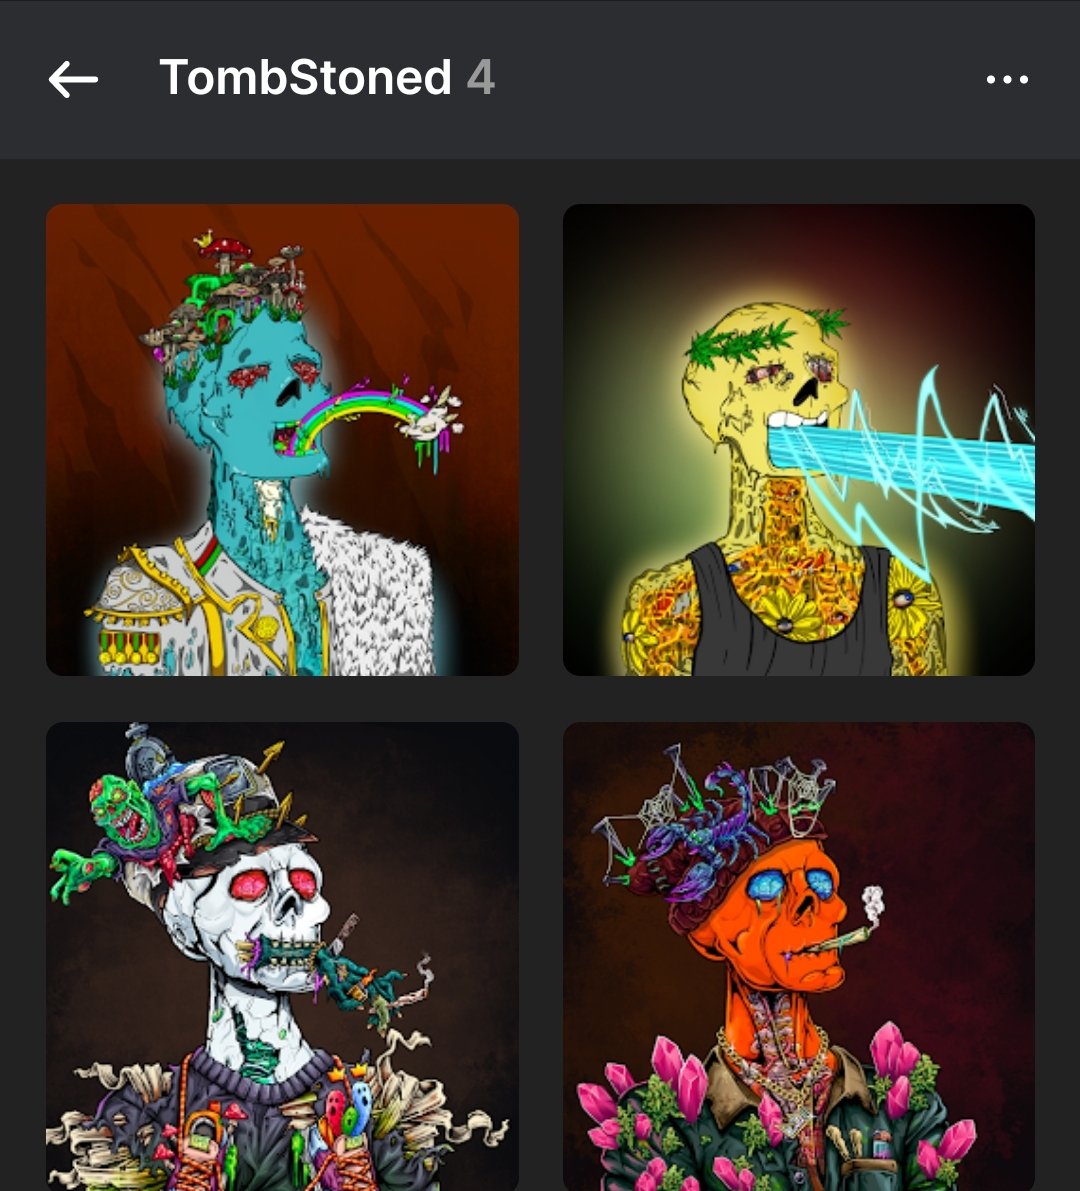 Added two more @TombStonedHS to my bag. Time to start stacking them $joints so I can resurrect these new ones!!